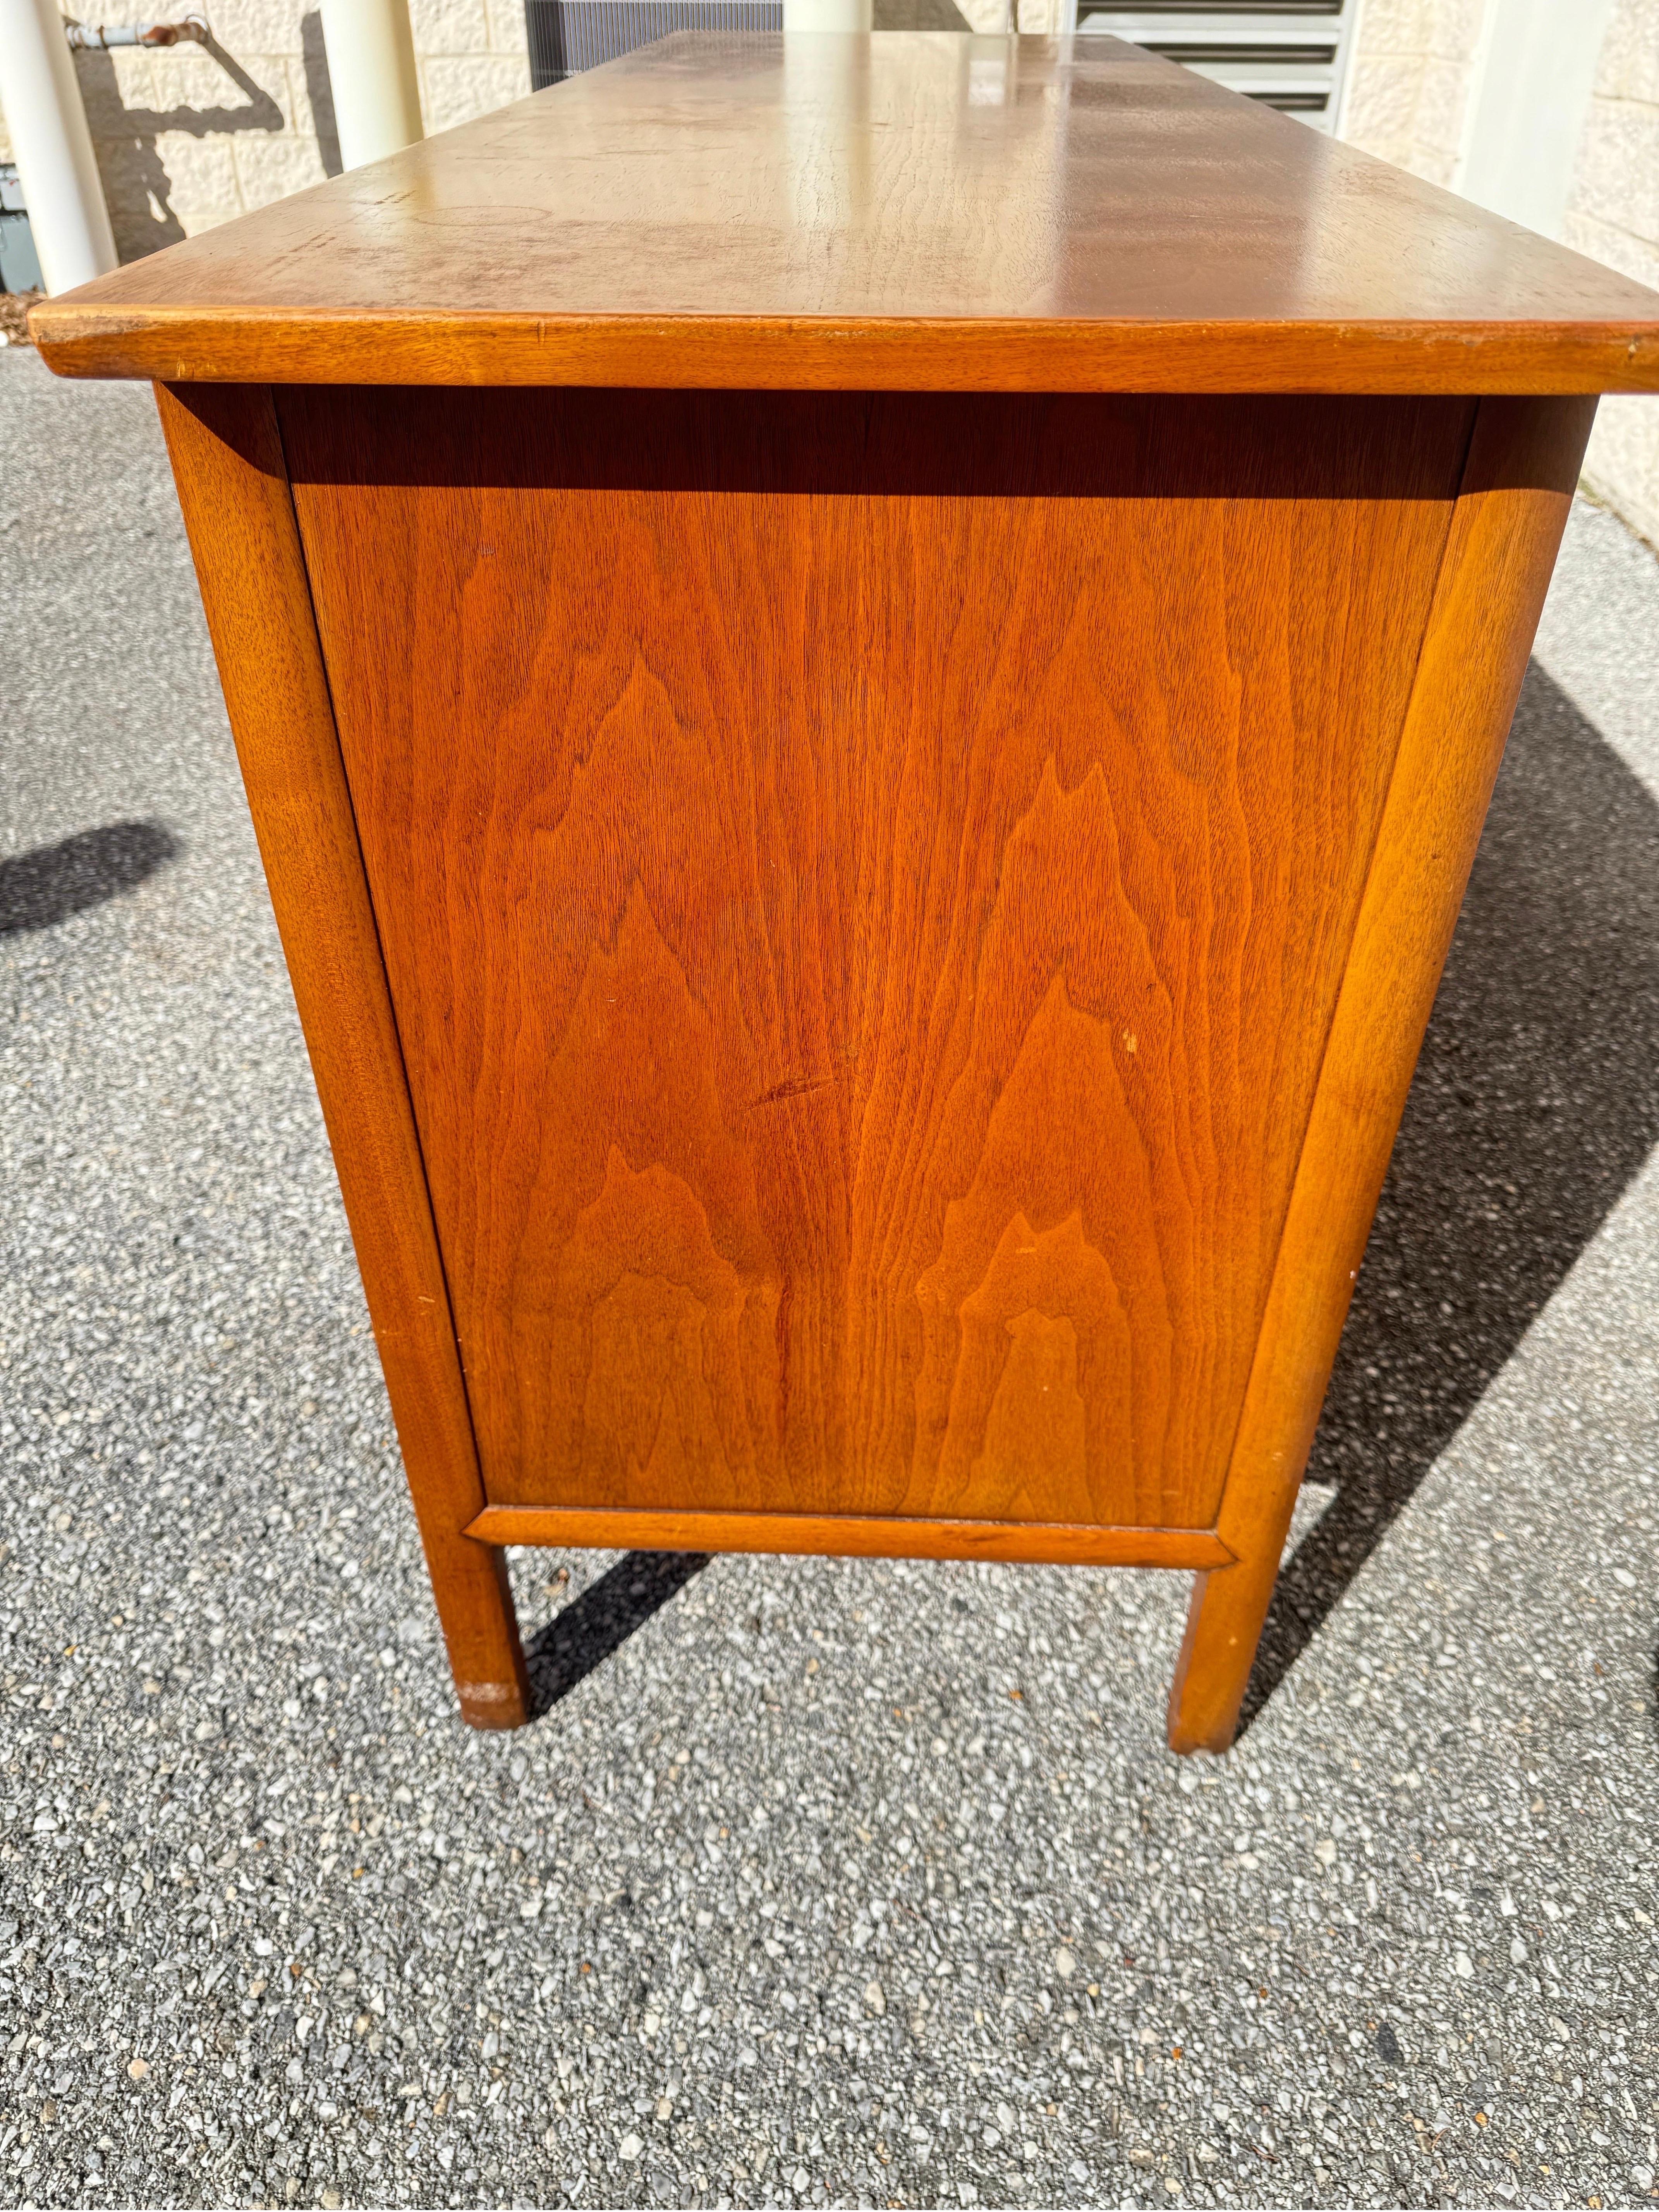 1960s Sculptural Credenza Sideboard by Drexel In Good Condition For Sale In Elkton, MD